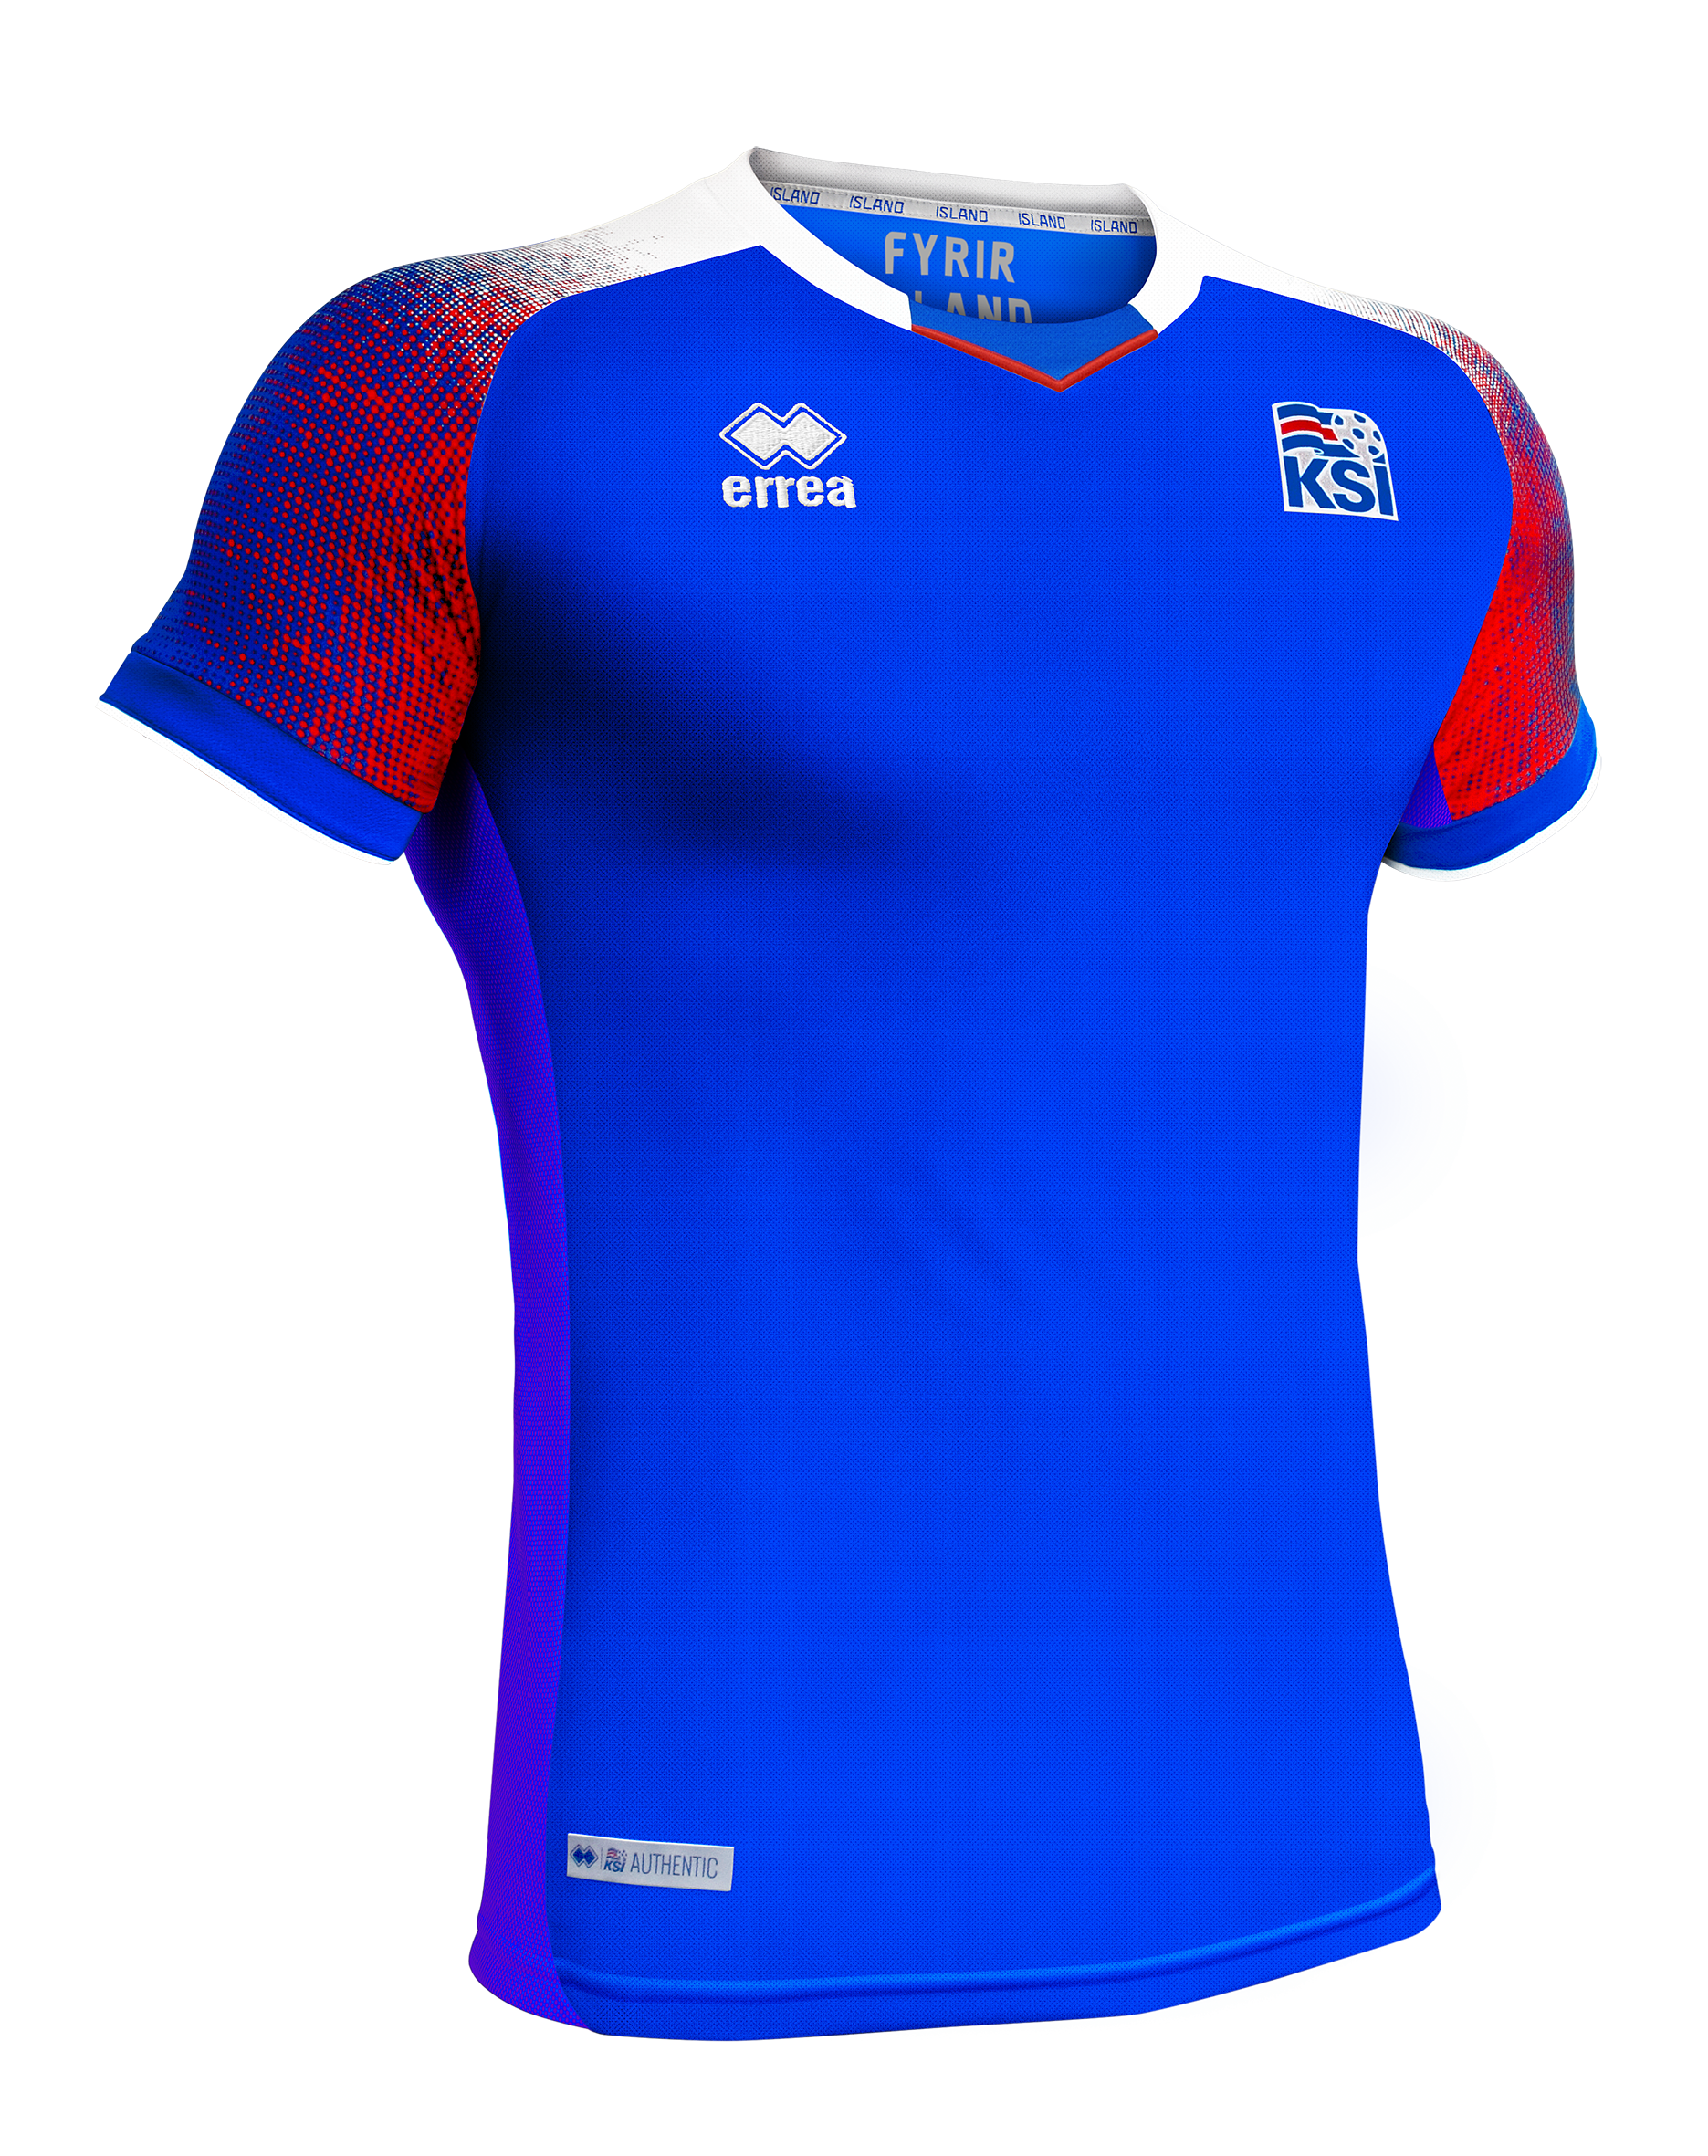 jersey world cup 2018